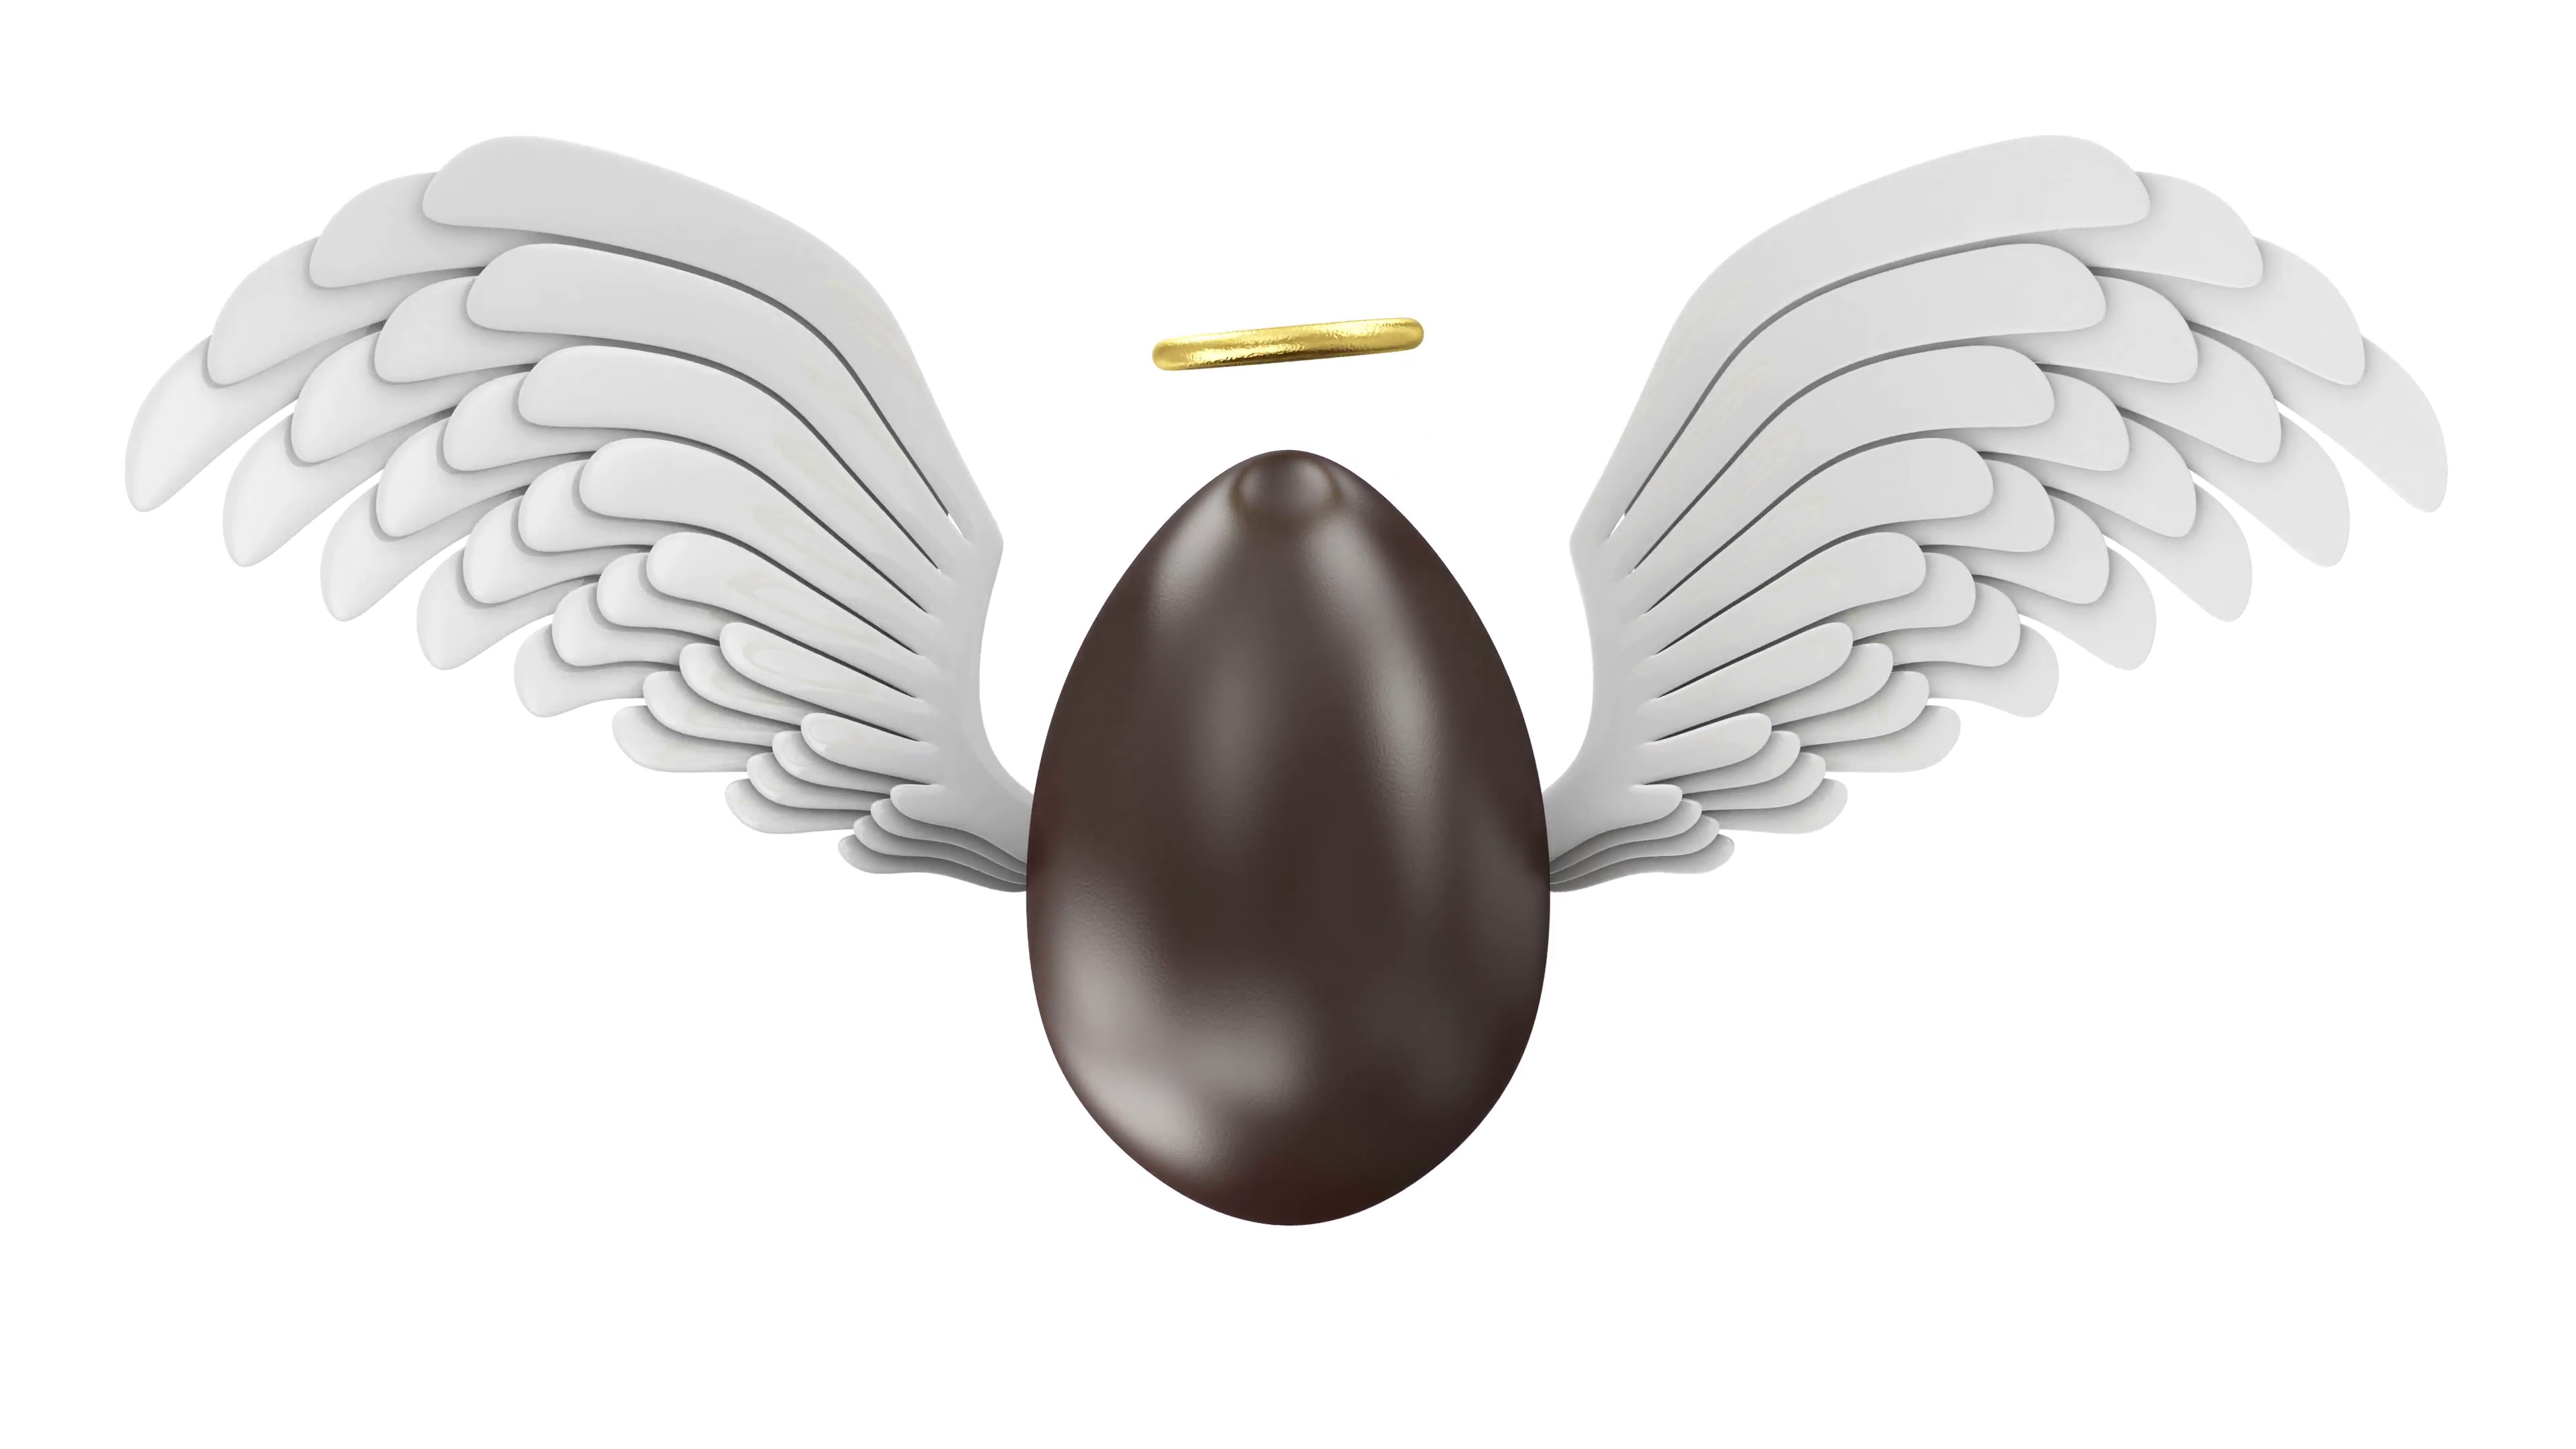 3840x2160 4K Animation of Chocolate Easter Egg with Angel Wings and Golden Nimbus